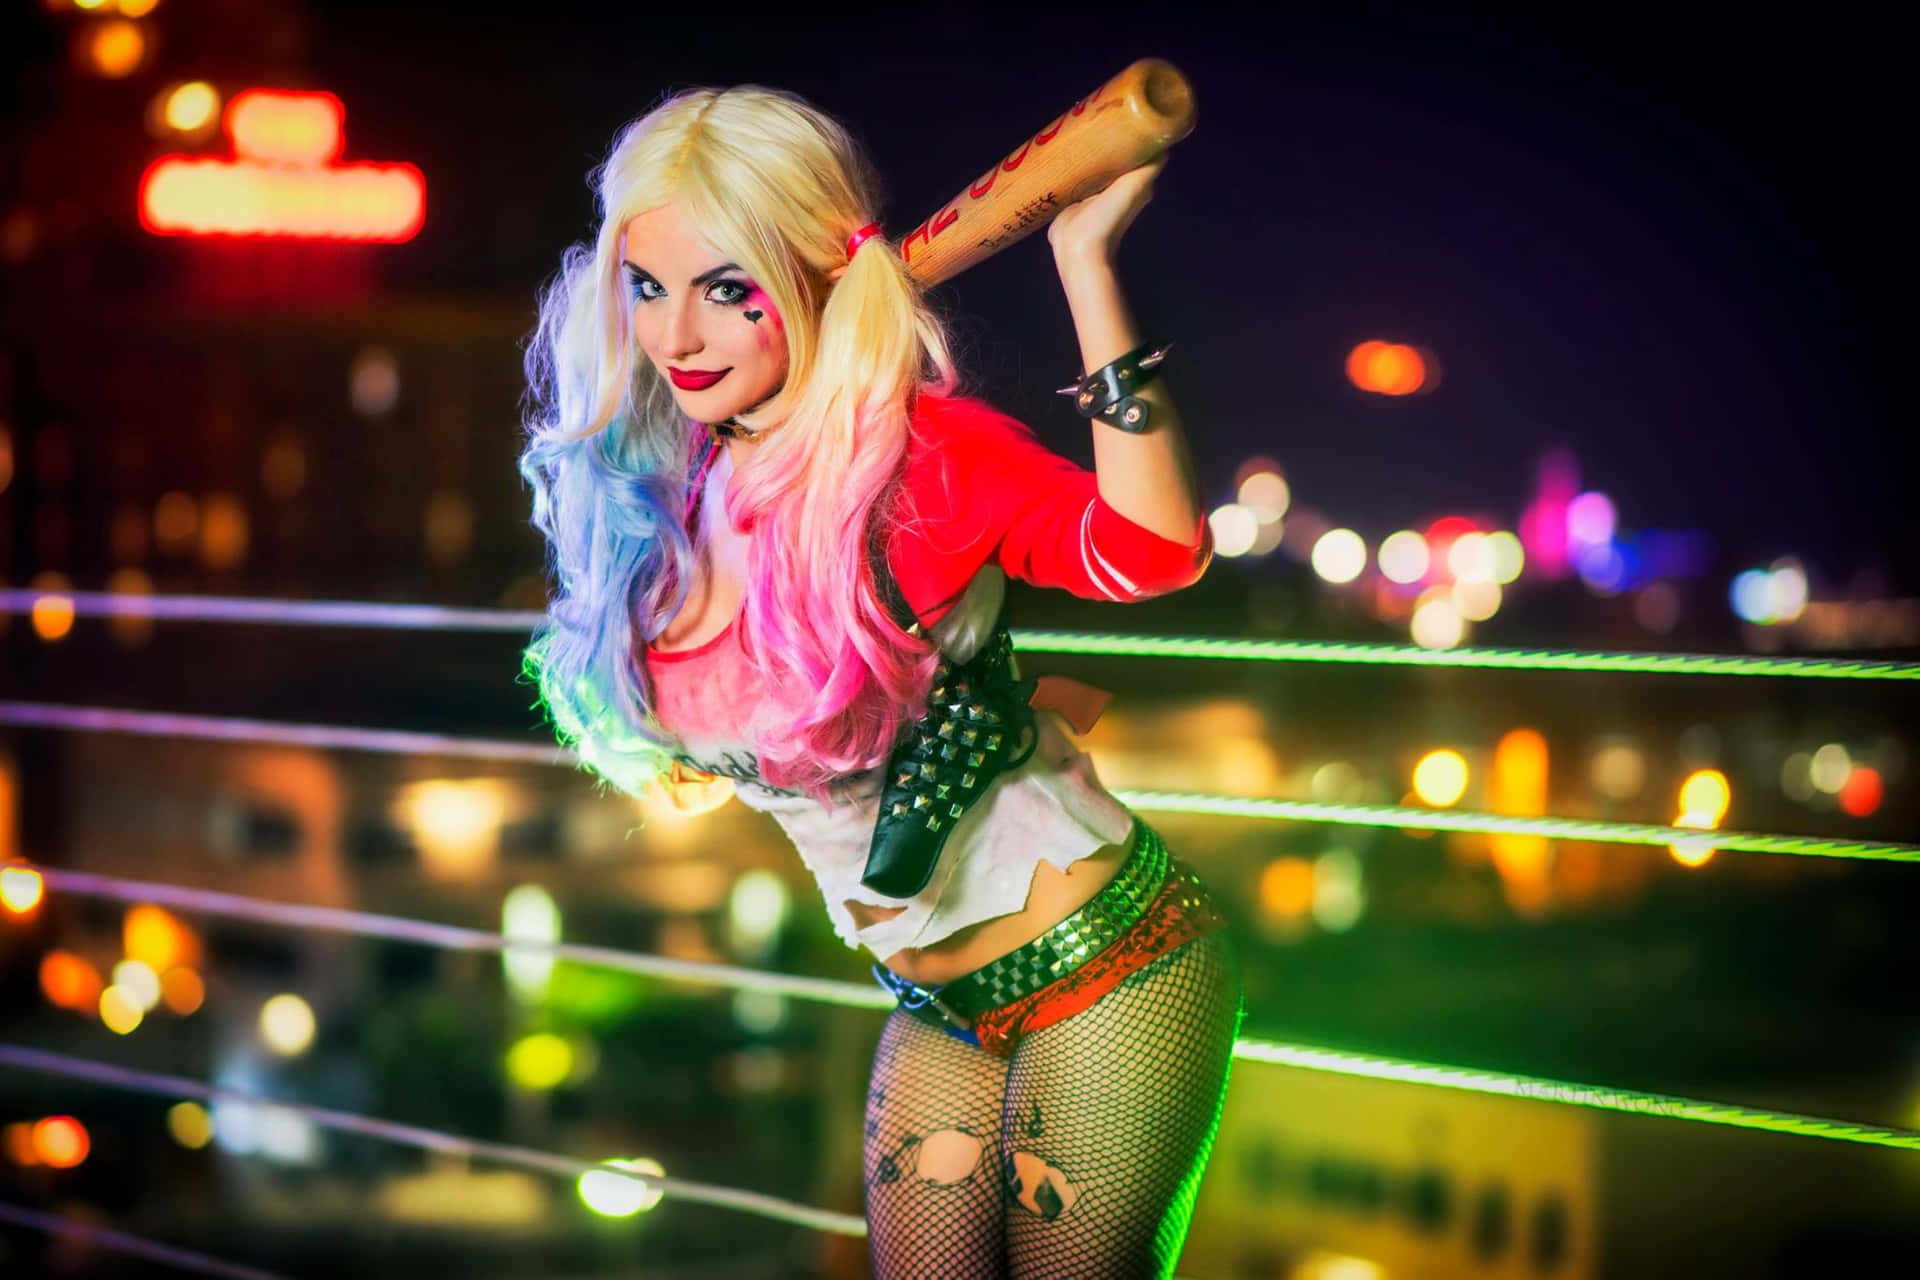 Remarkable Harley Quinn Cosplay In Action Wallpaper